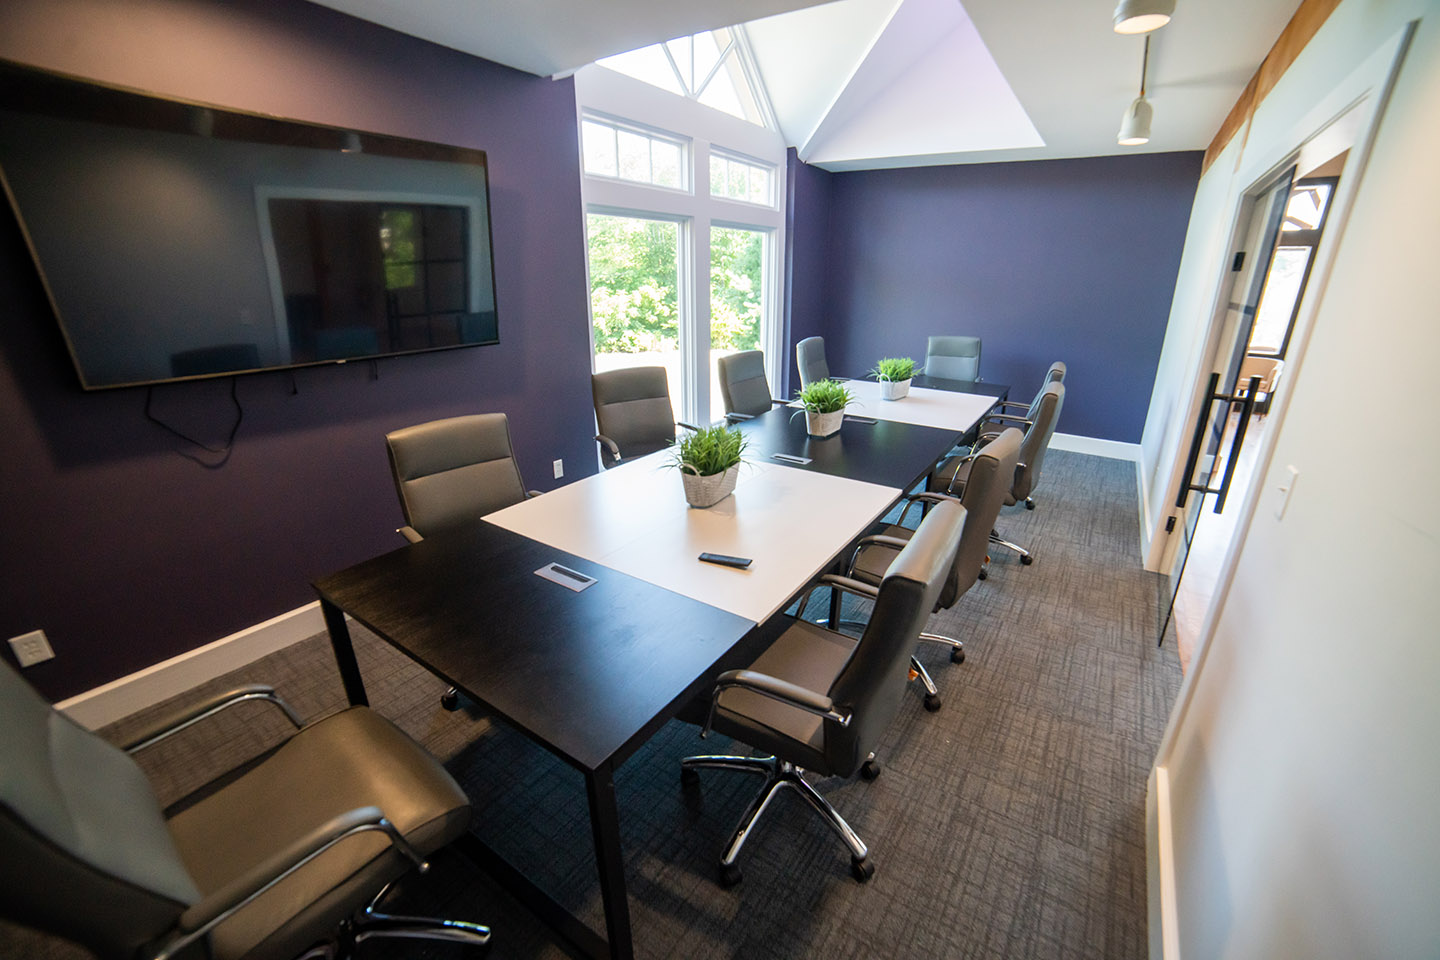 Moody conference room at Rebel HQ featuring long black and white table, purple walls and a mounted tv